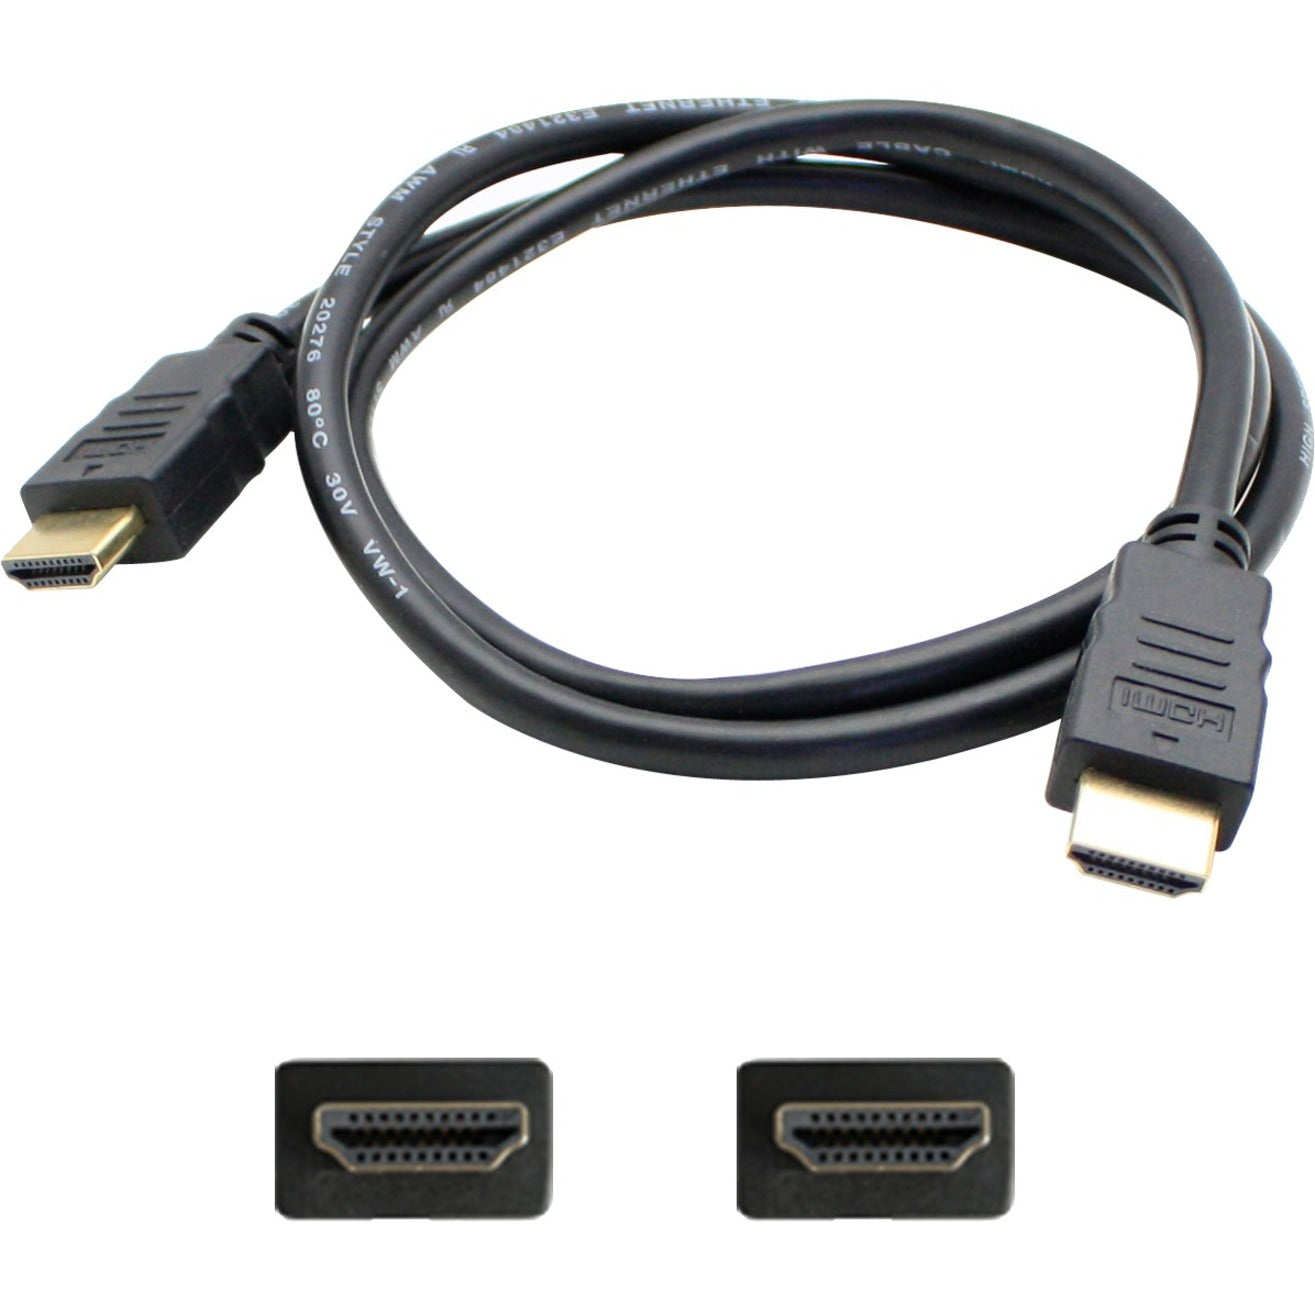 AddOn HDMI2HDMI6F-5PK Bulk 5 Pack 6ft (1.8M) HDMI to HDMI 1.3 Cable - Male to Male, 1080P High Definition Video and Audio Transmission